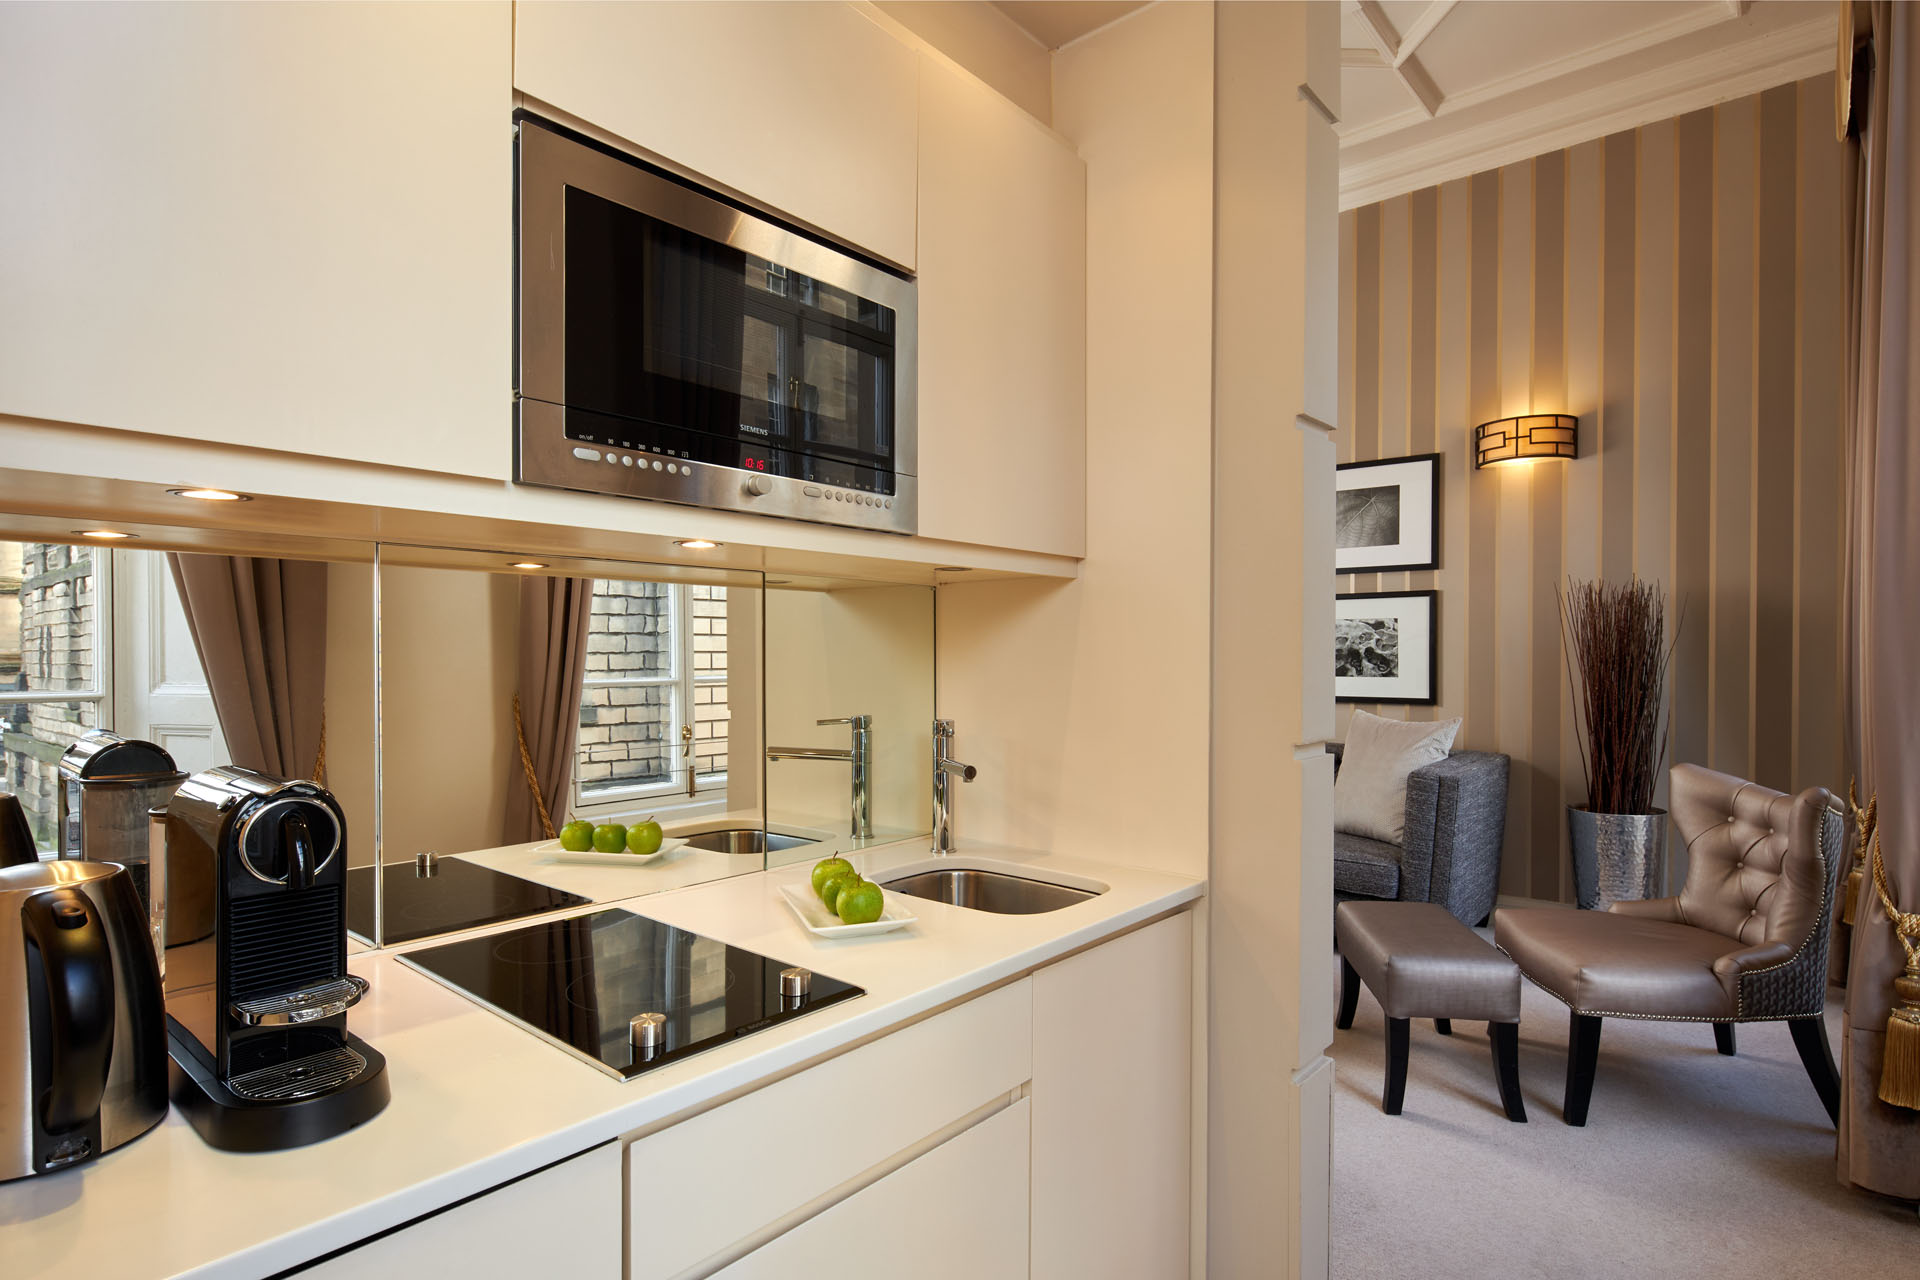 Overview of Courant Suite in Edinburgh hotel